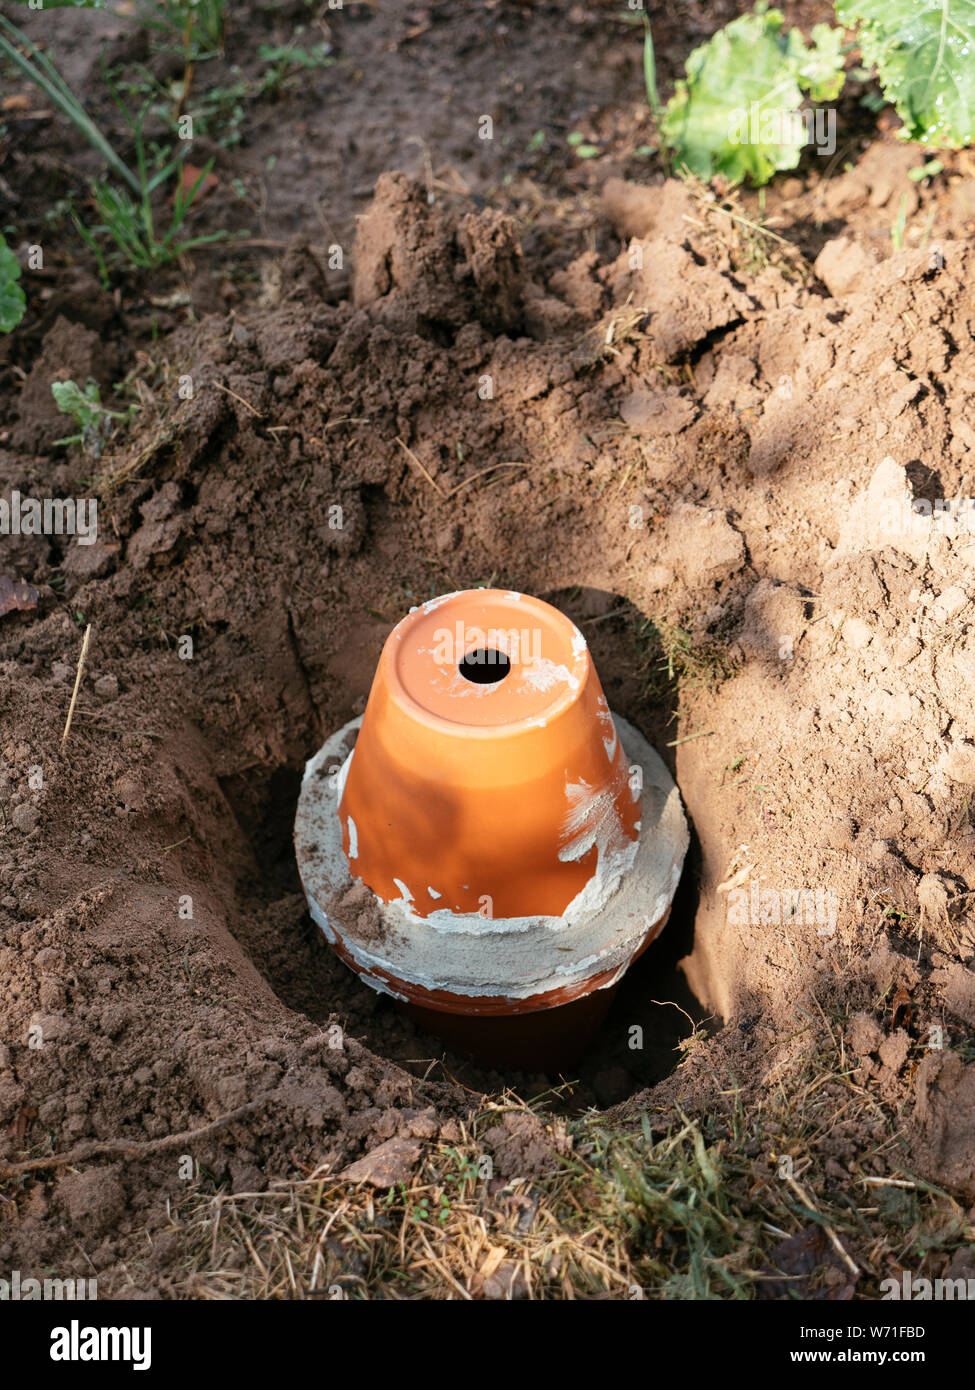 Home made clay pot irrigation system being dug into the garden Stock Photo  - Alamy